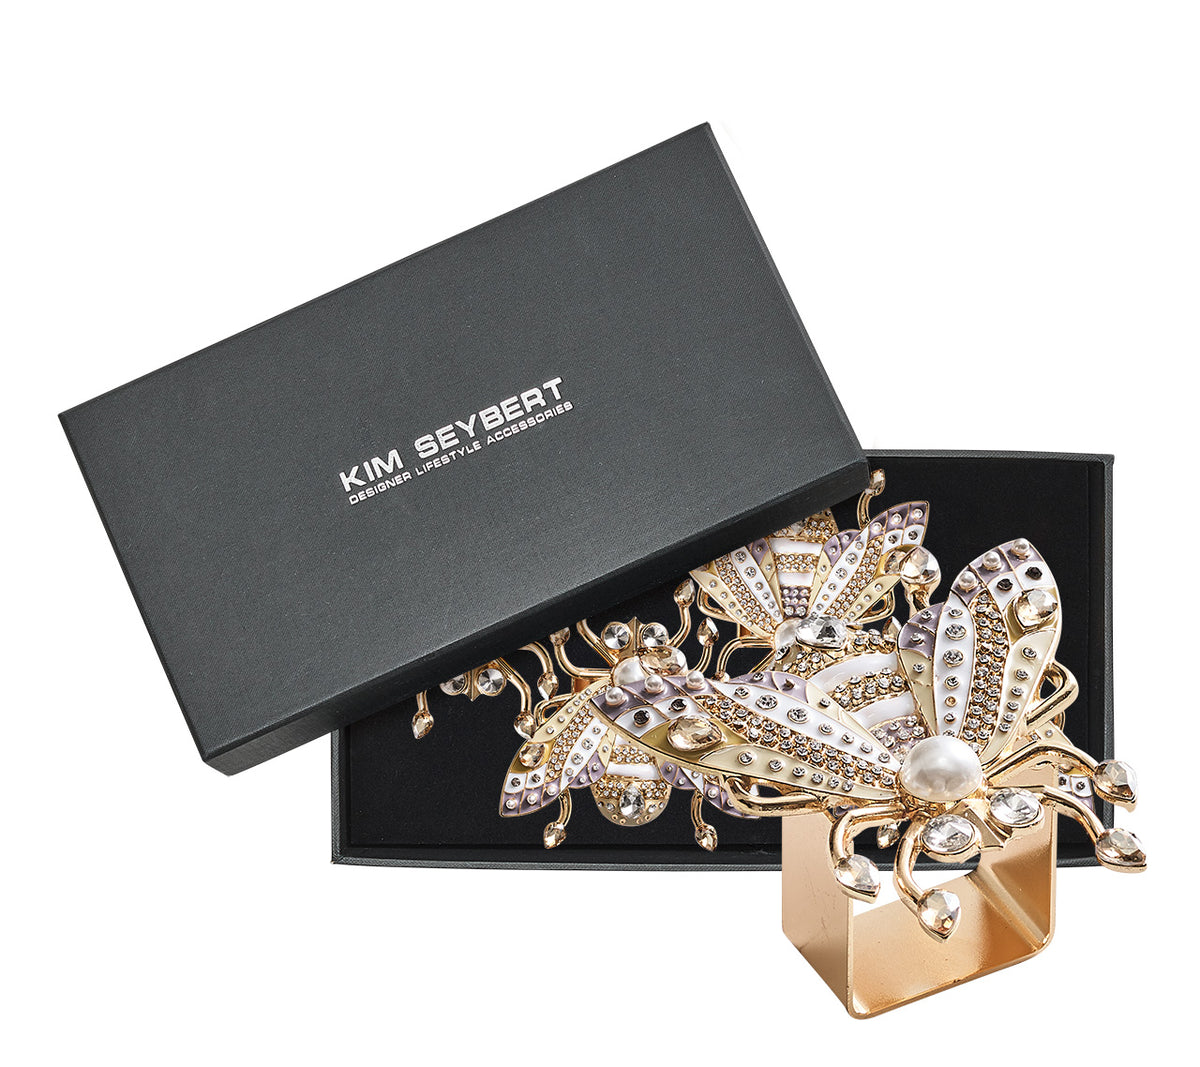 Glam Fly Napkin Ring in Ivory, Gold & Silver Set of 4 in a Gift Box